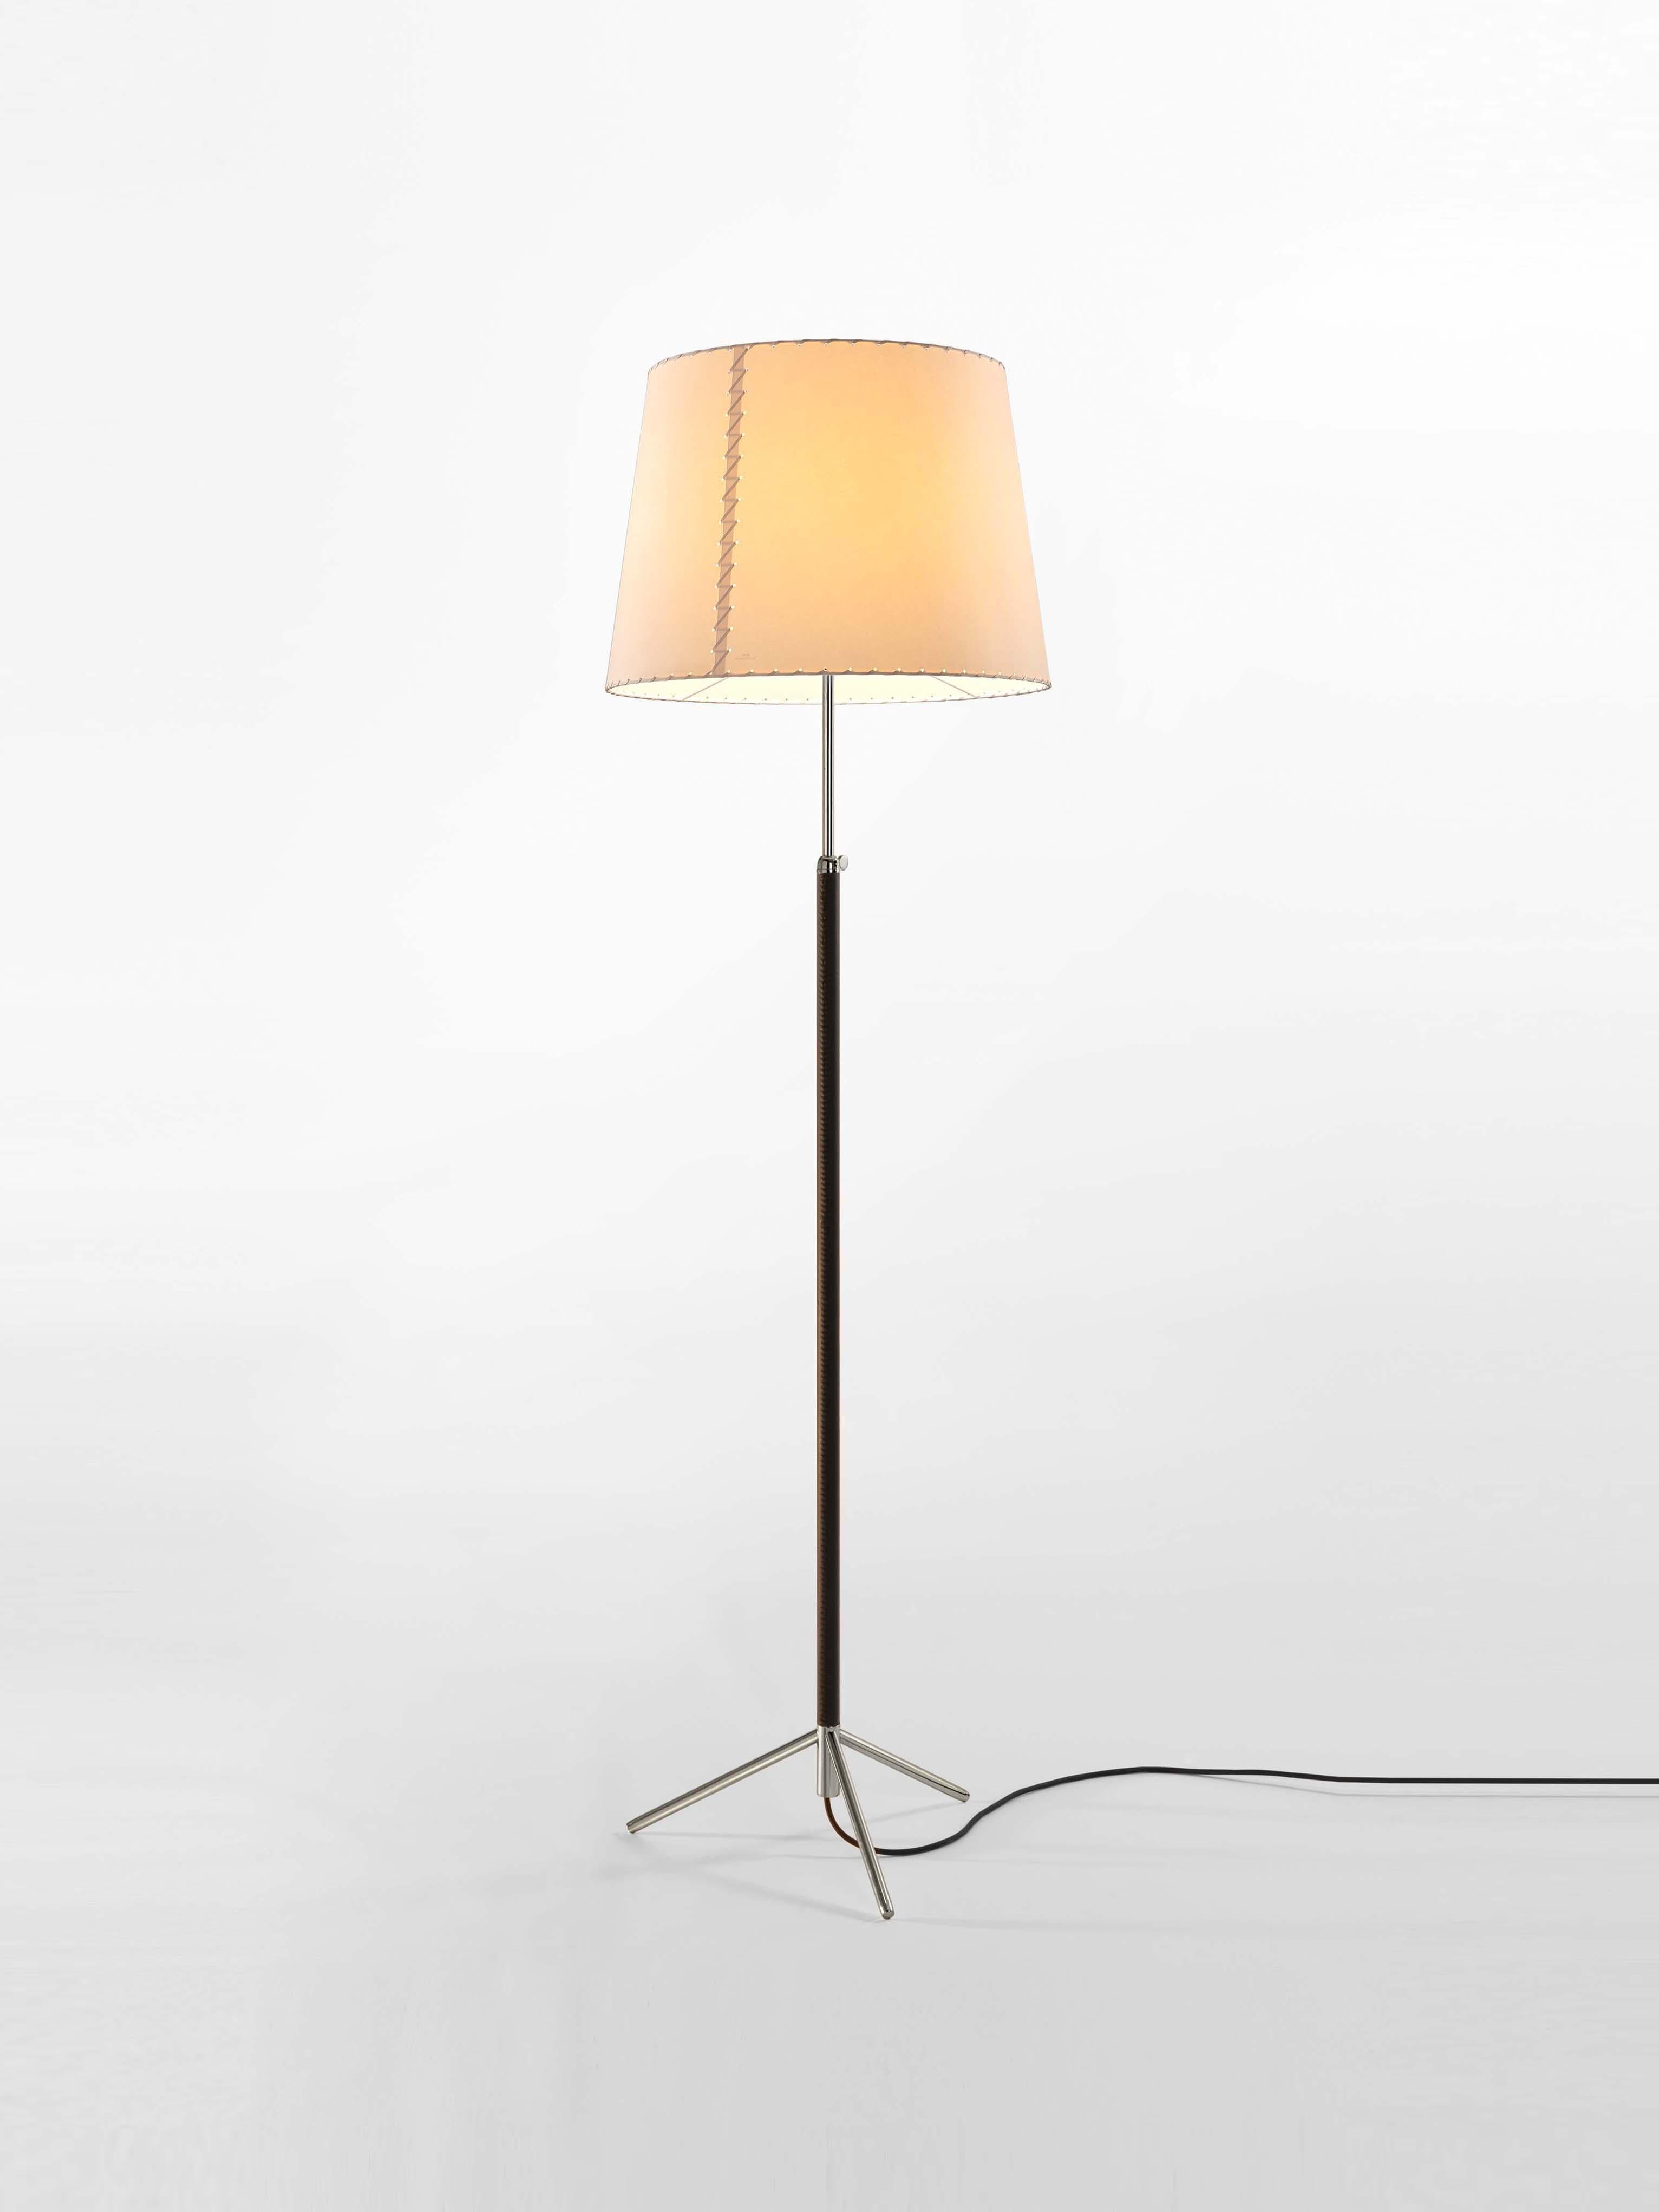 Beige and Chrome Pie de Salón G1 floor lamp by Jaume Sans
Dimensions: D 45 x H 120-160 cm
Materials: Metal, leather, stitched parchment
Available in chrome-plated or polished brass structure.
Available in other shade colors and sizes.

This